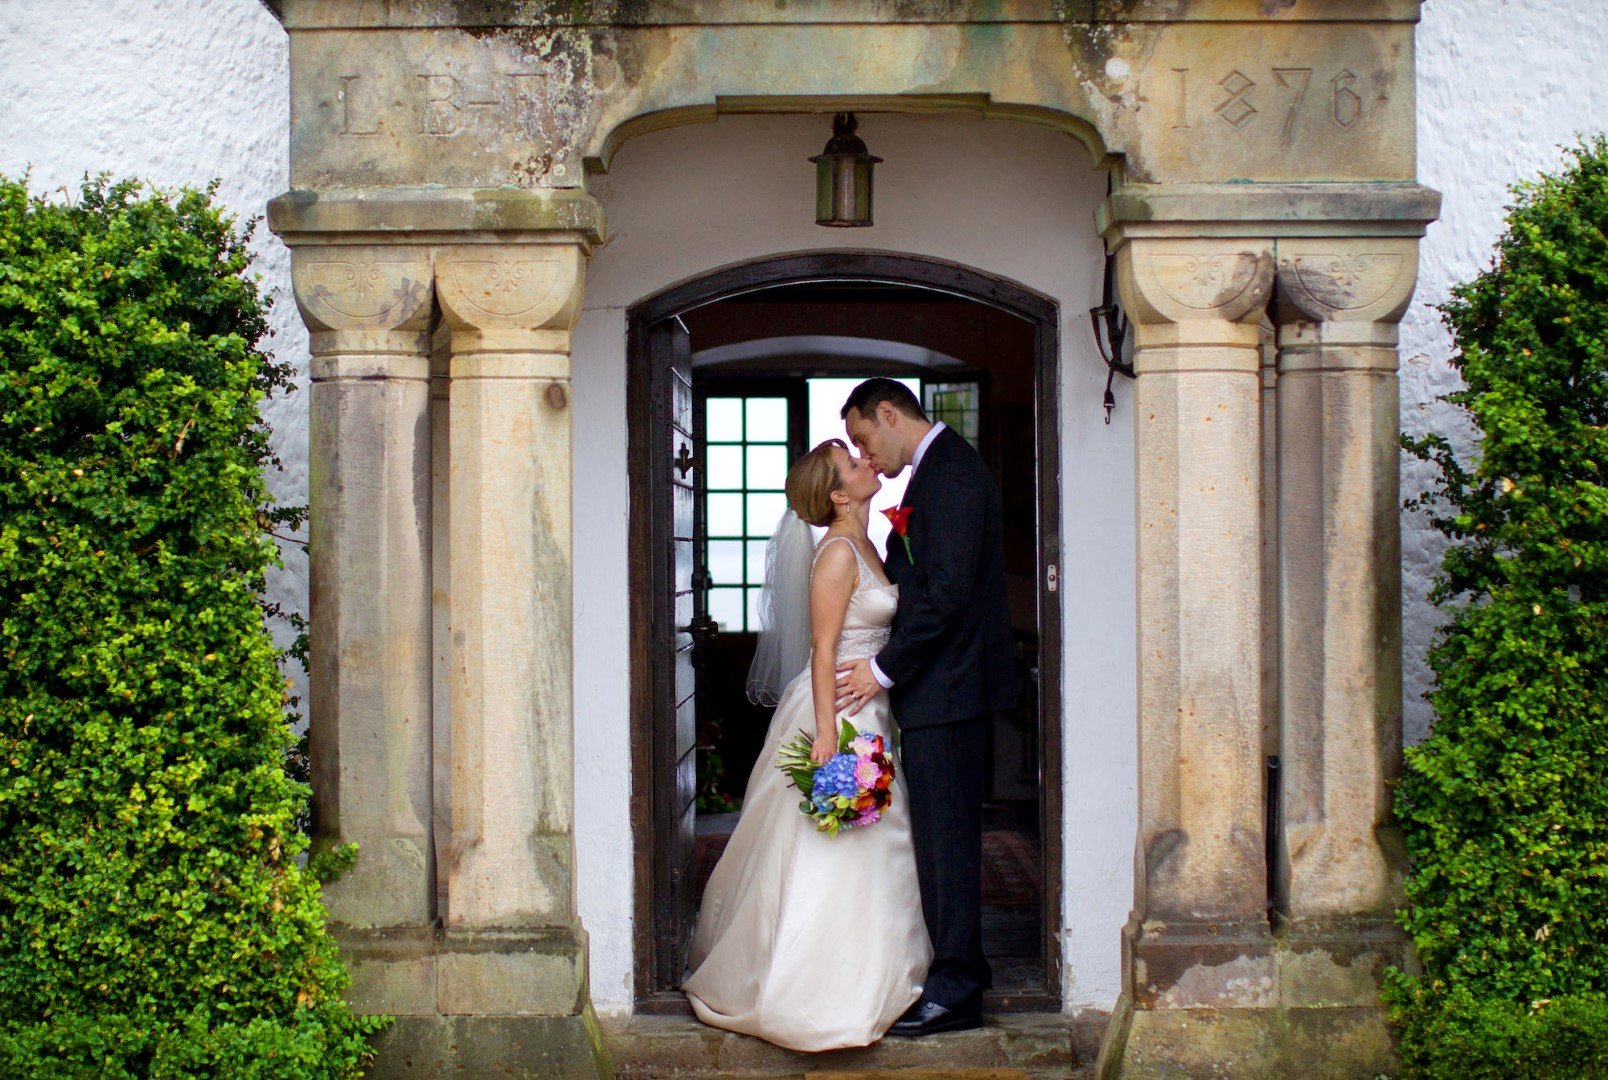  A photographer can compose  a "first meet" in the  beautiful castle area  Photo: Mette Ottosson  